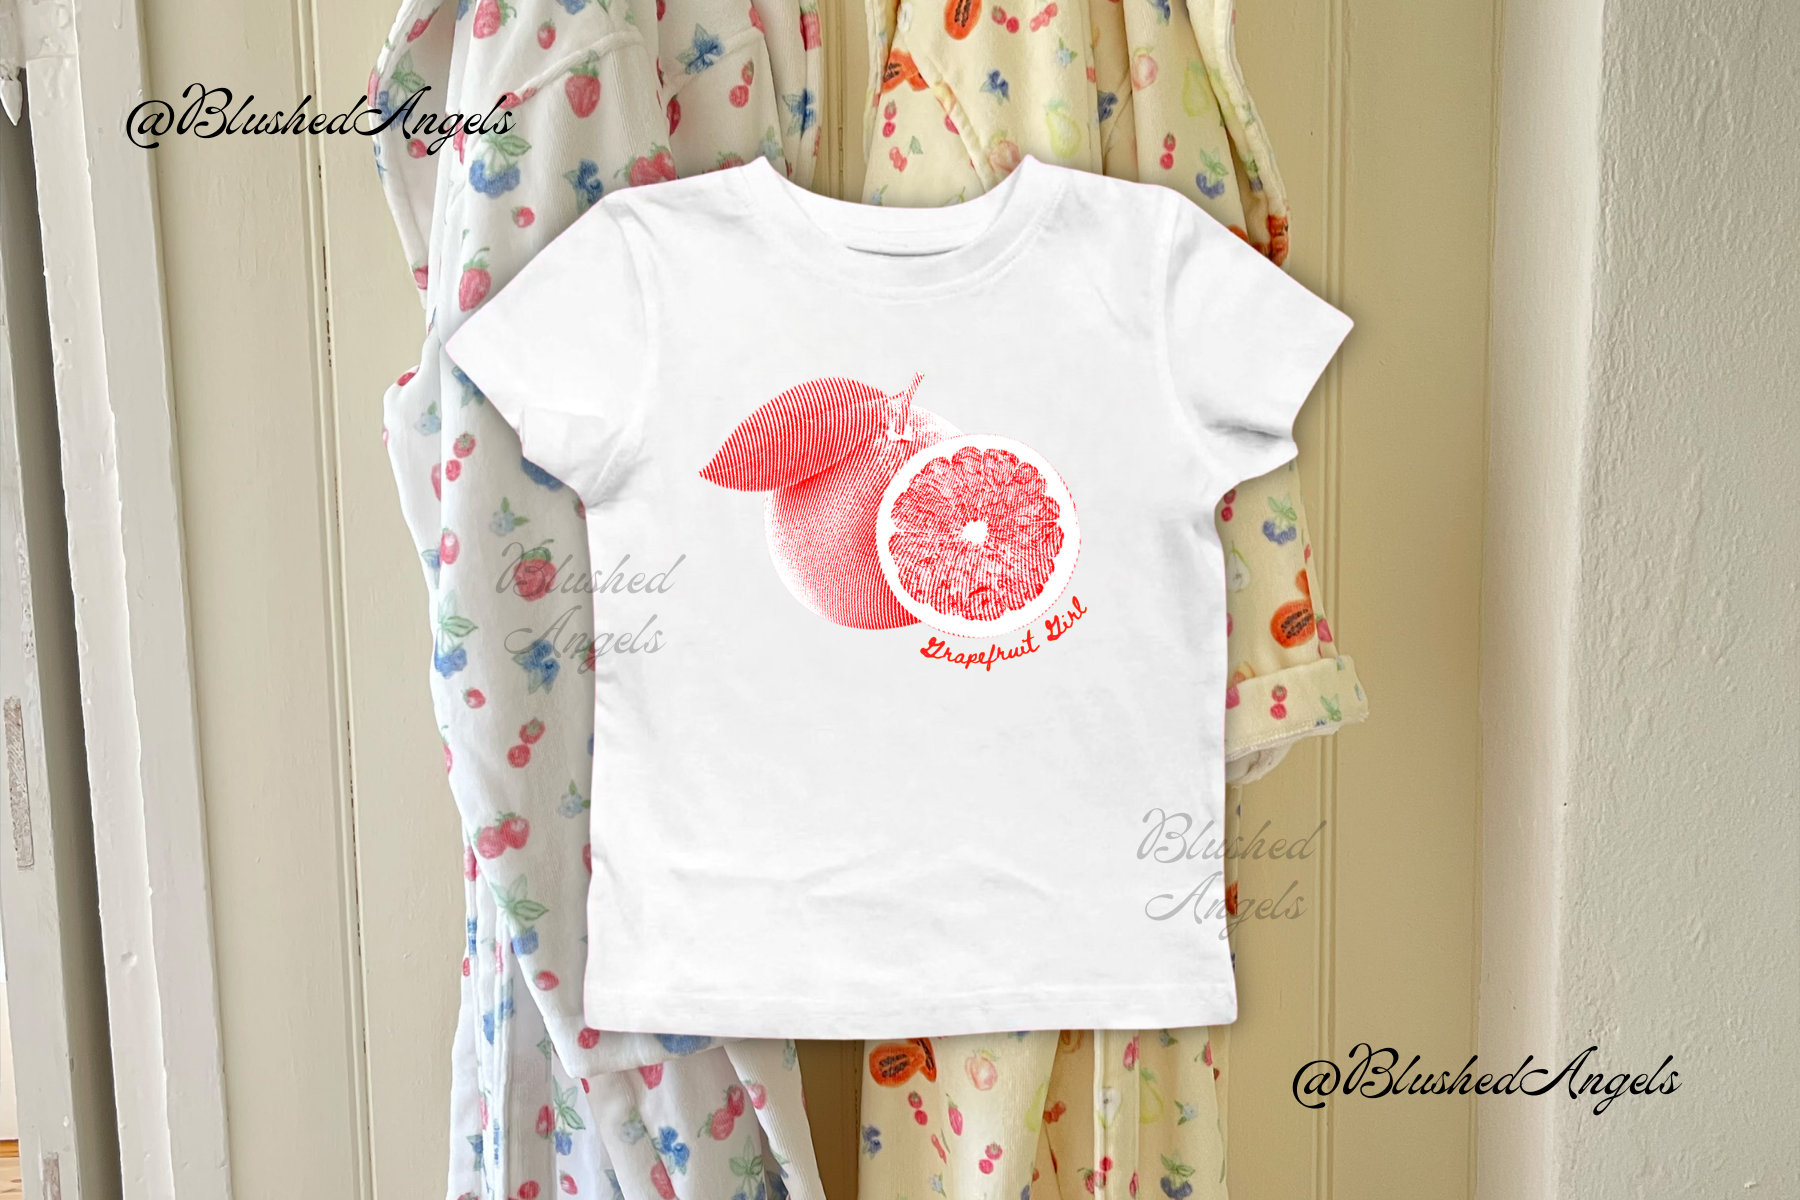 With Cherries on Top Coquette Baby Tee, Cherries With Bows Graphic